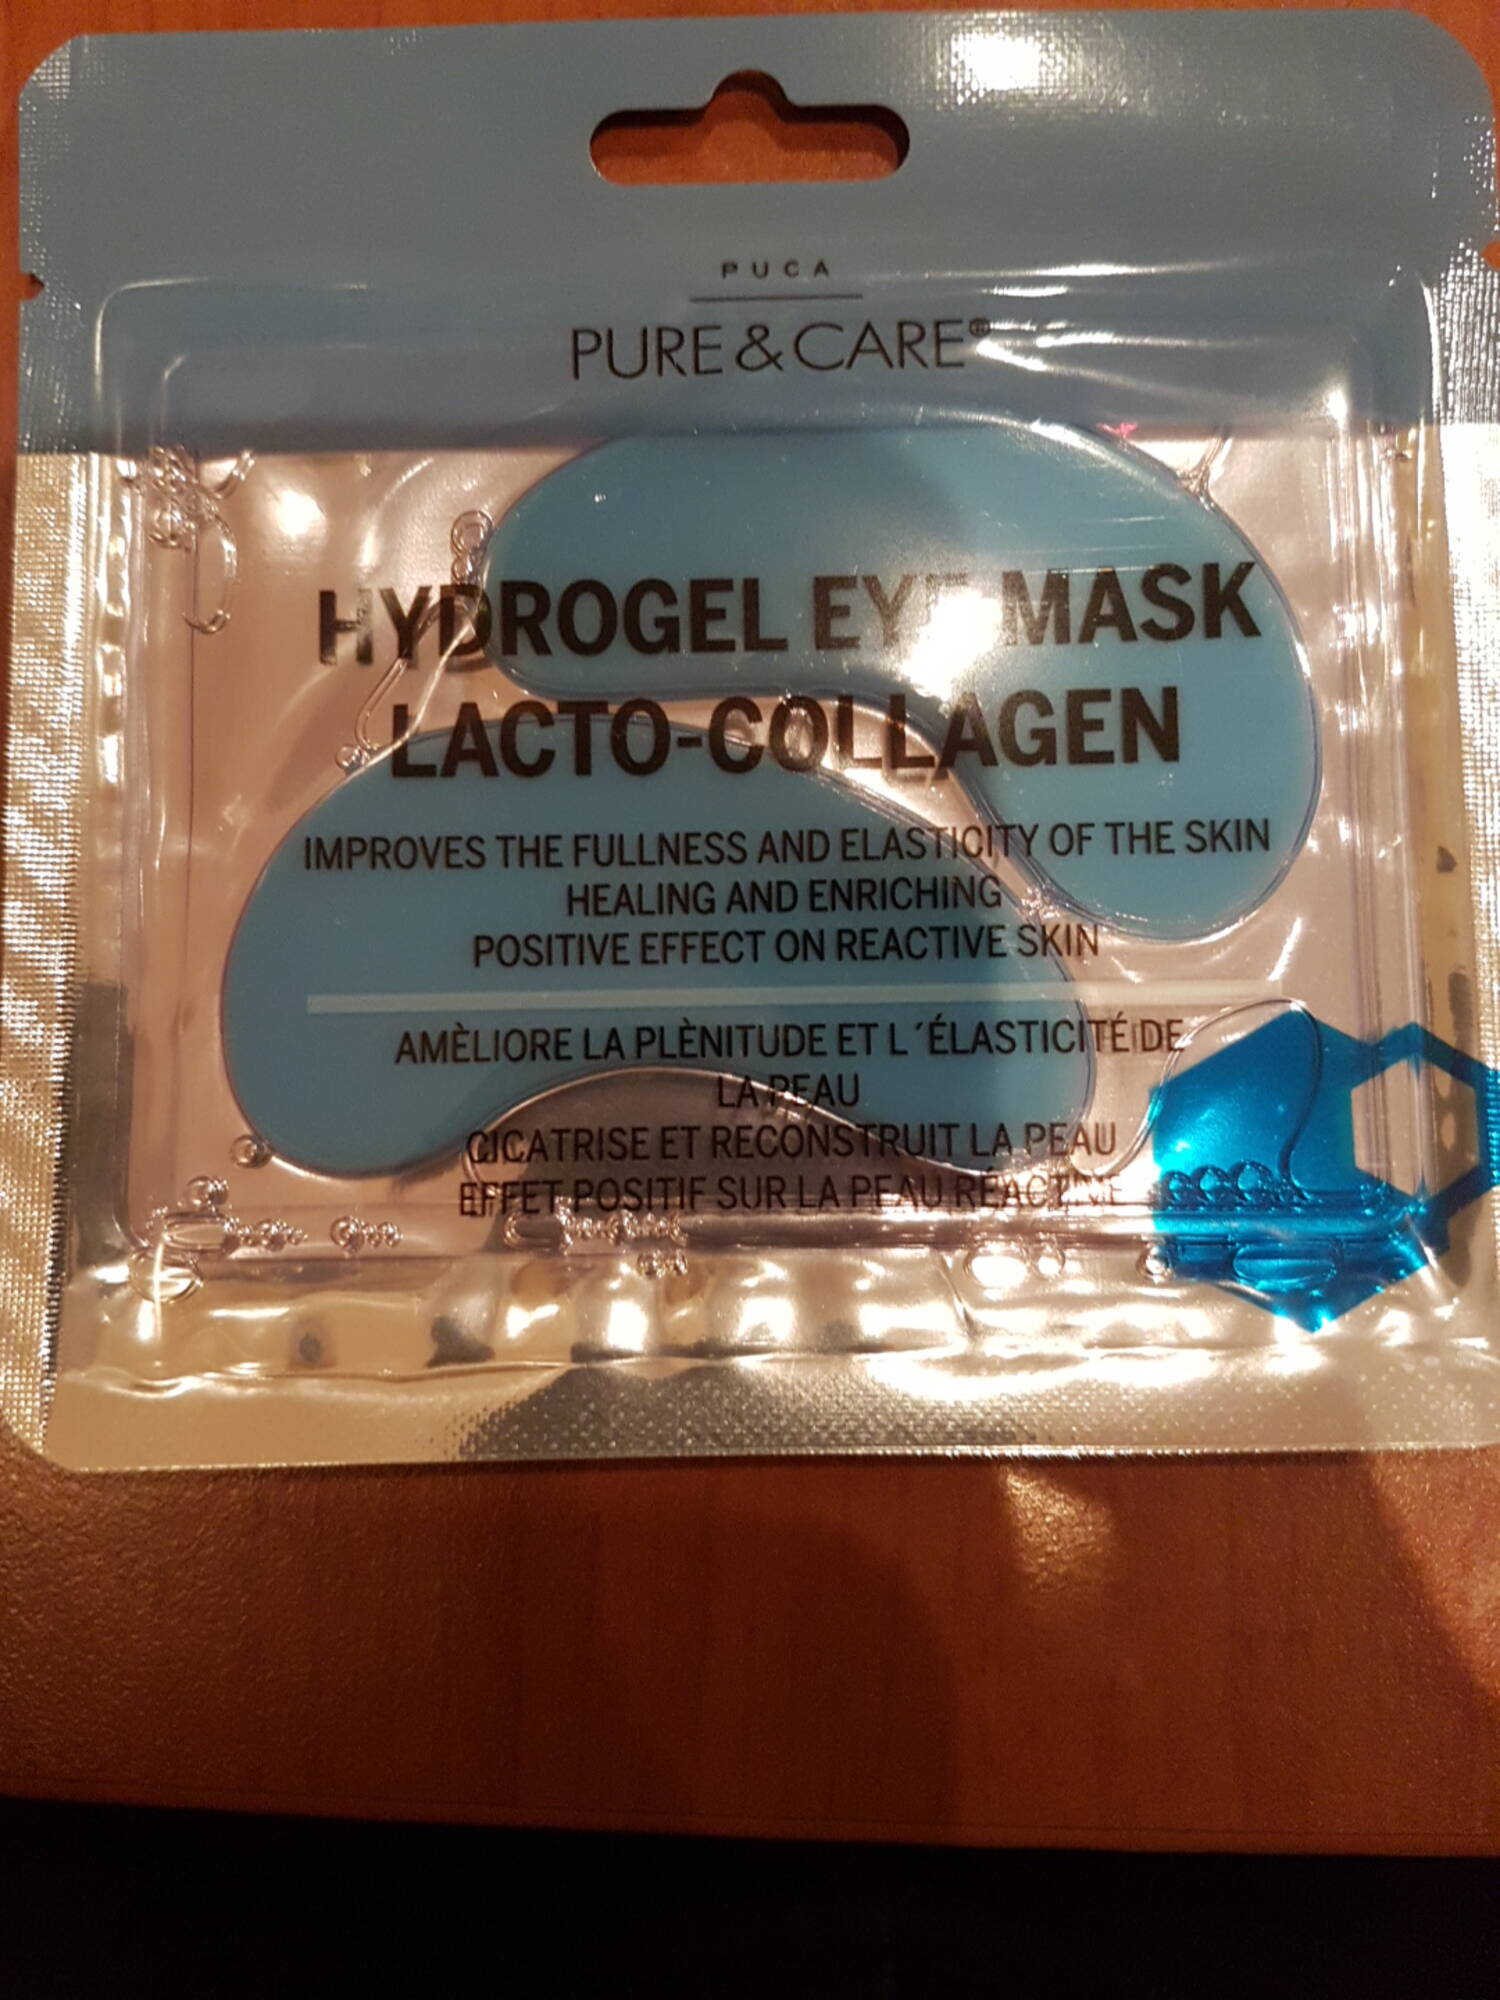 PUCA - Pure & care - Hydrogel eye mask lacto-collagen